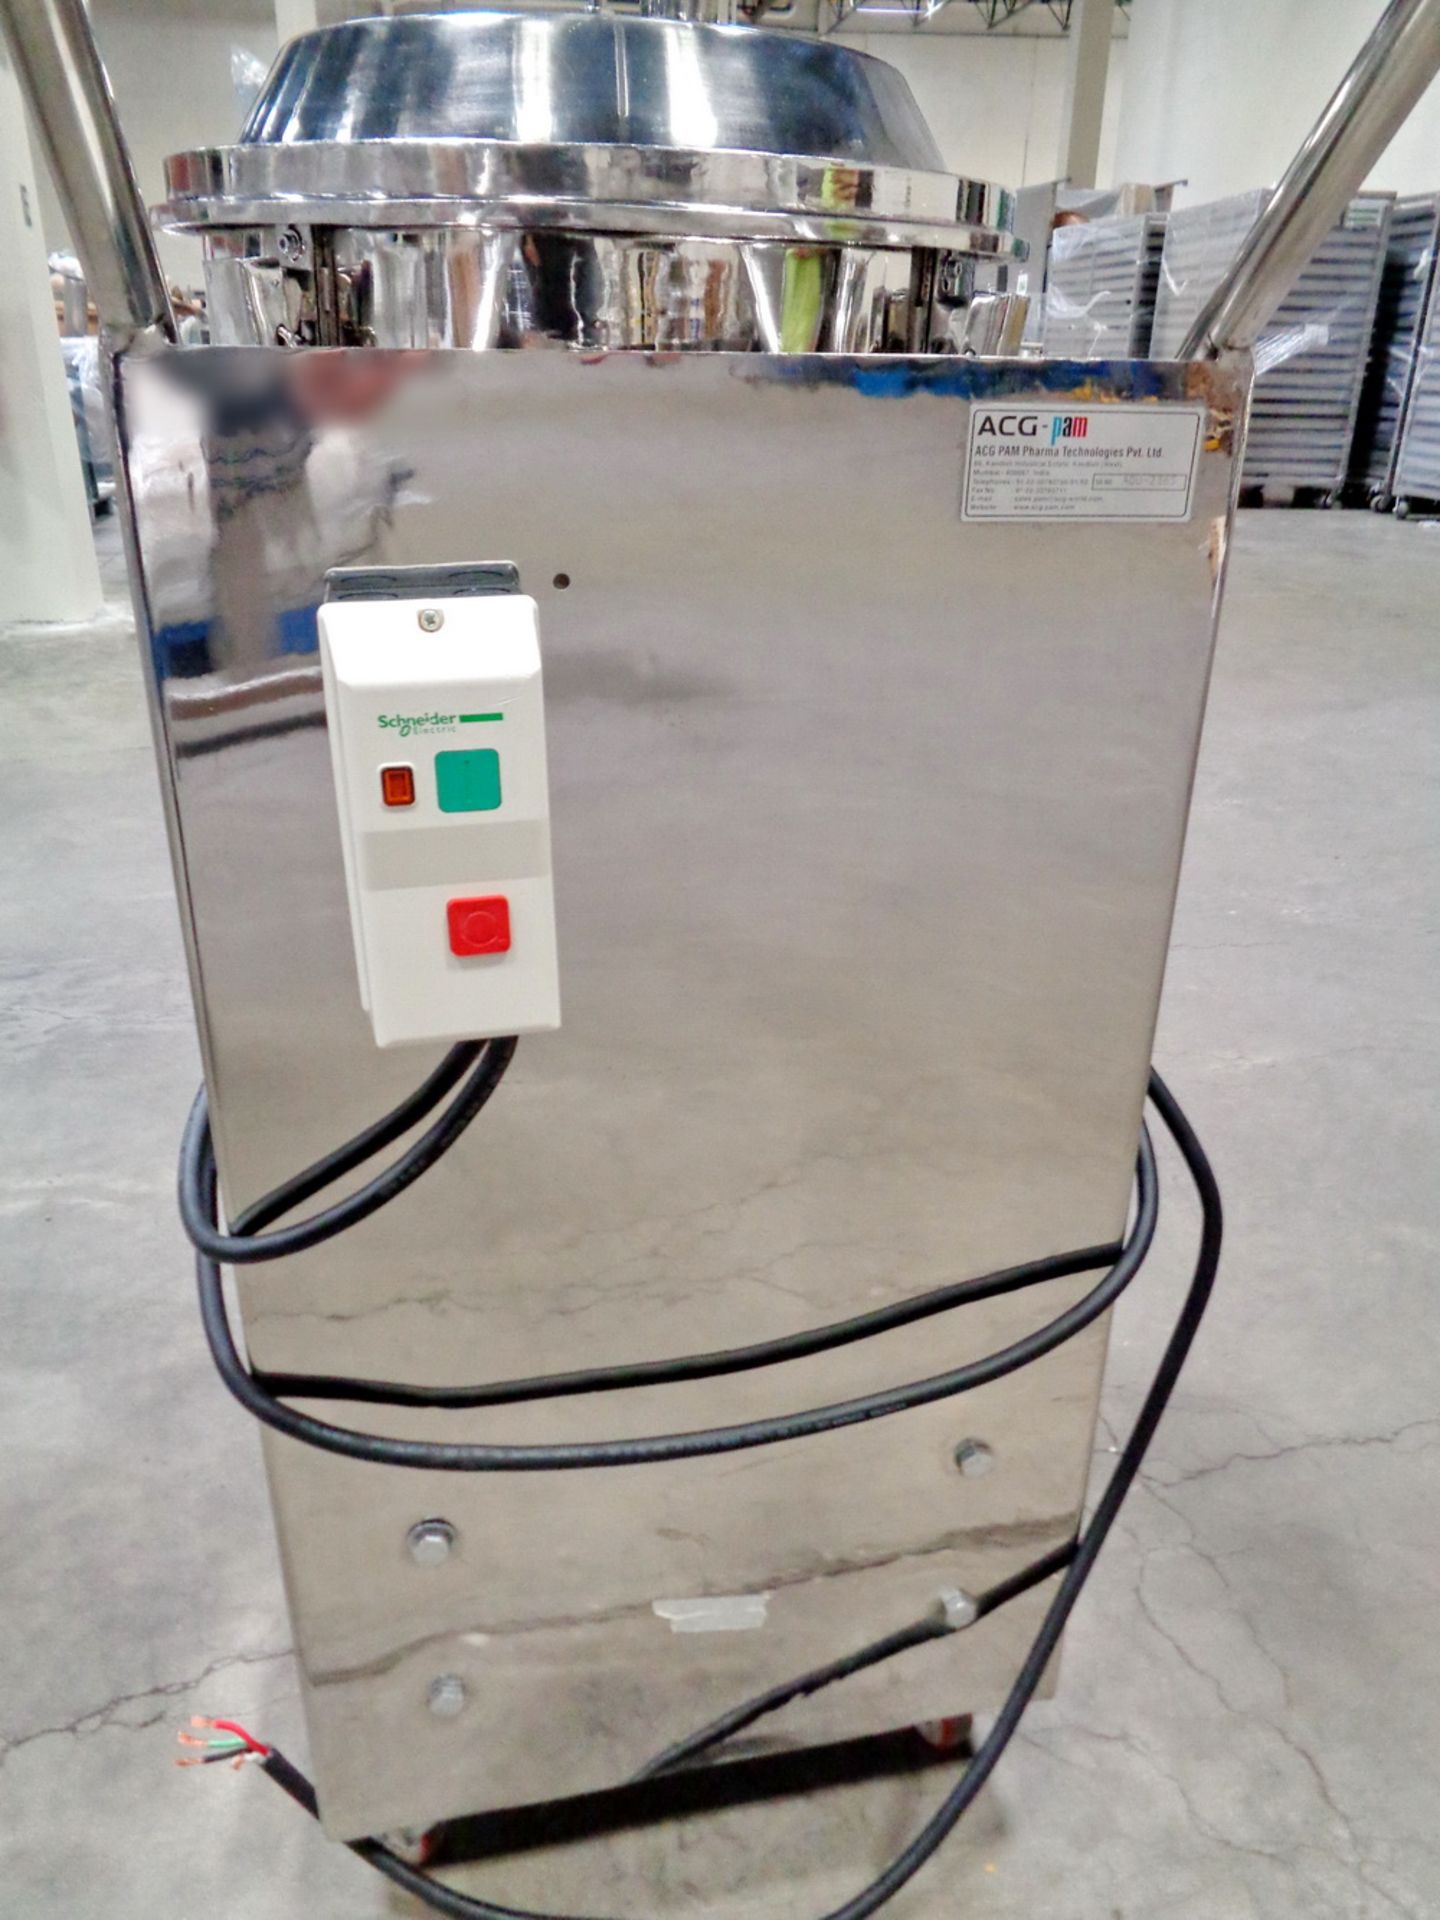 ACG PAM Portable SS Dust Extraction Vacuum, Model ADU-100 - Image 5 of 6